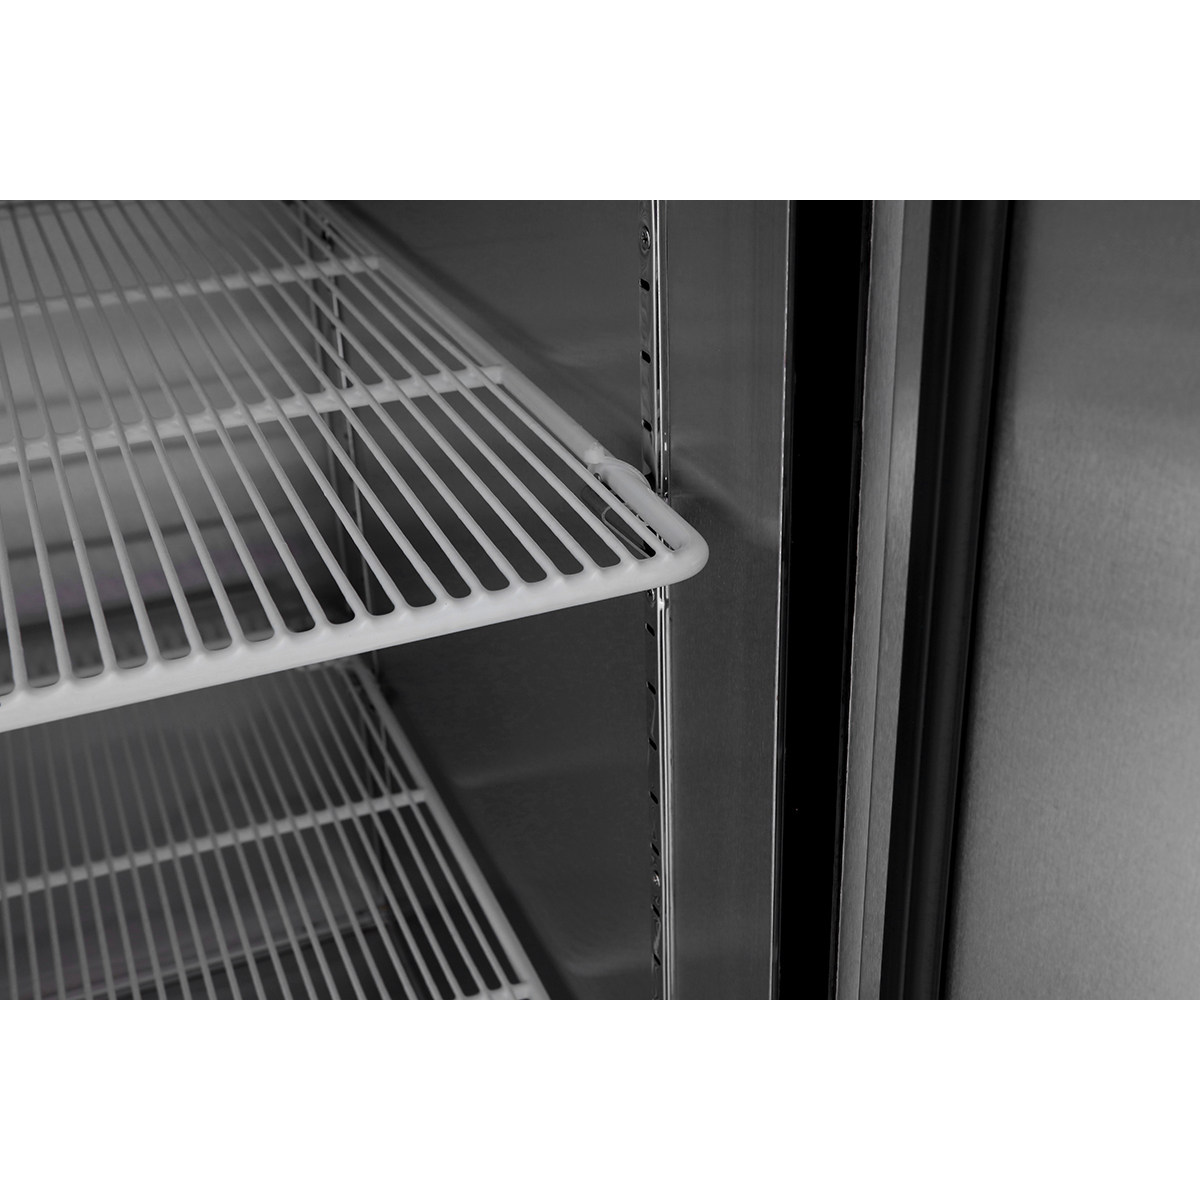 Atosa MBF8002GR Reach-In 2 Section Top Mount Freezer 51-3/4"W x 31-1/2"D x 82-7/8"H with 2 Locking Solid Doors image 6